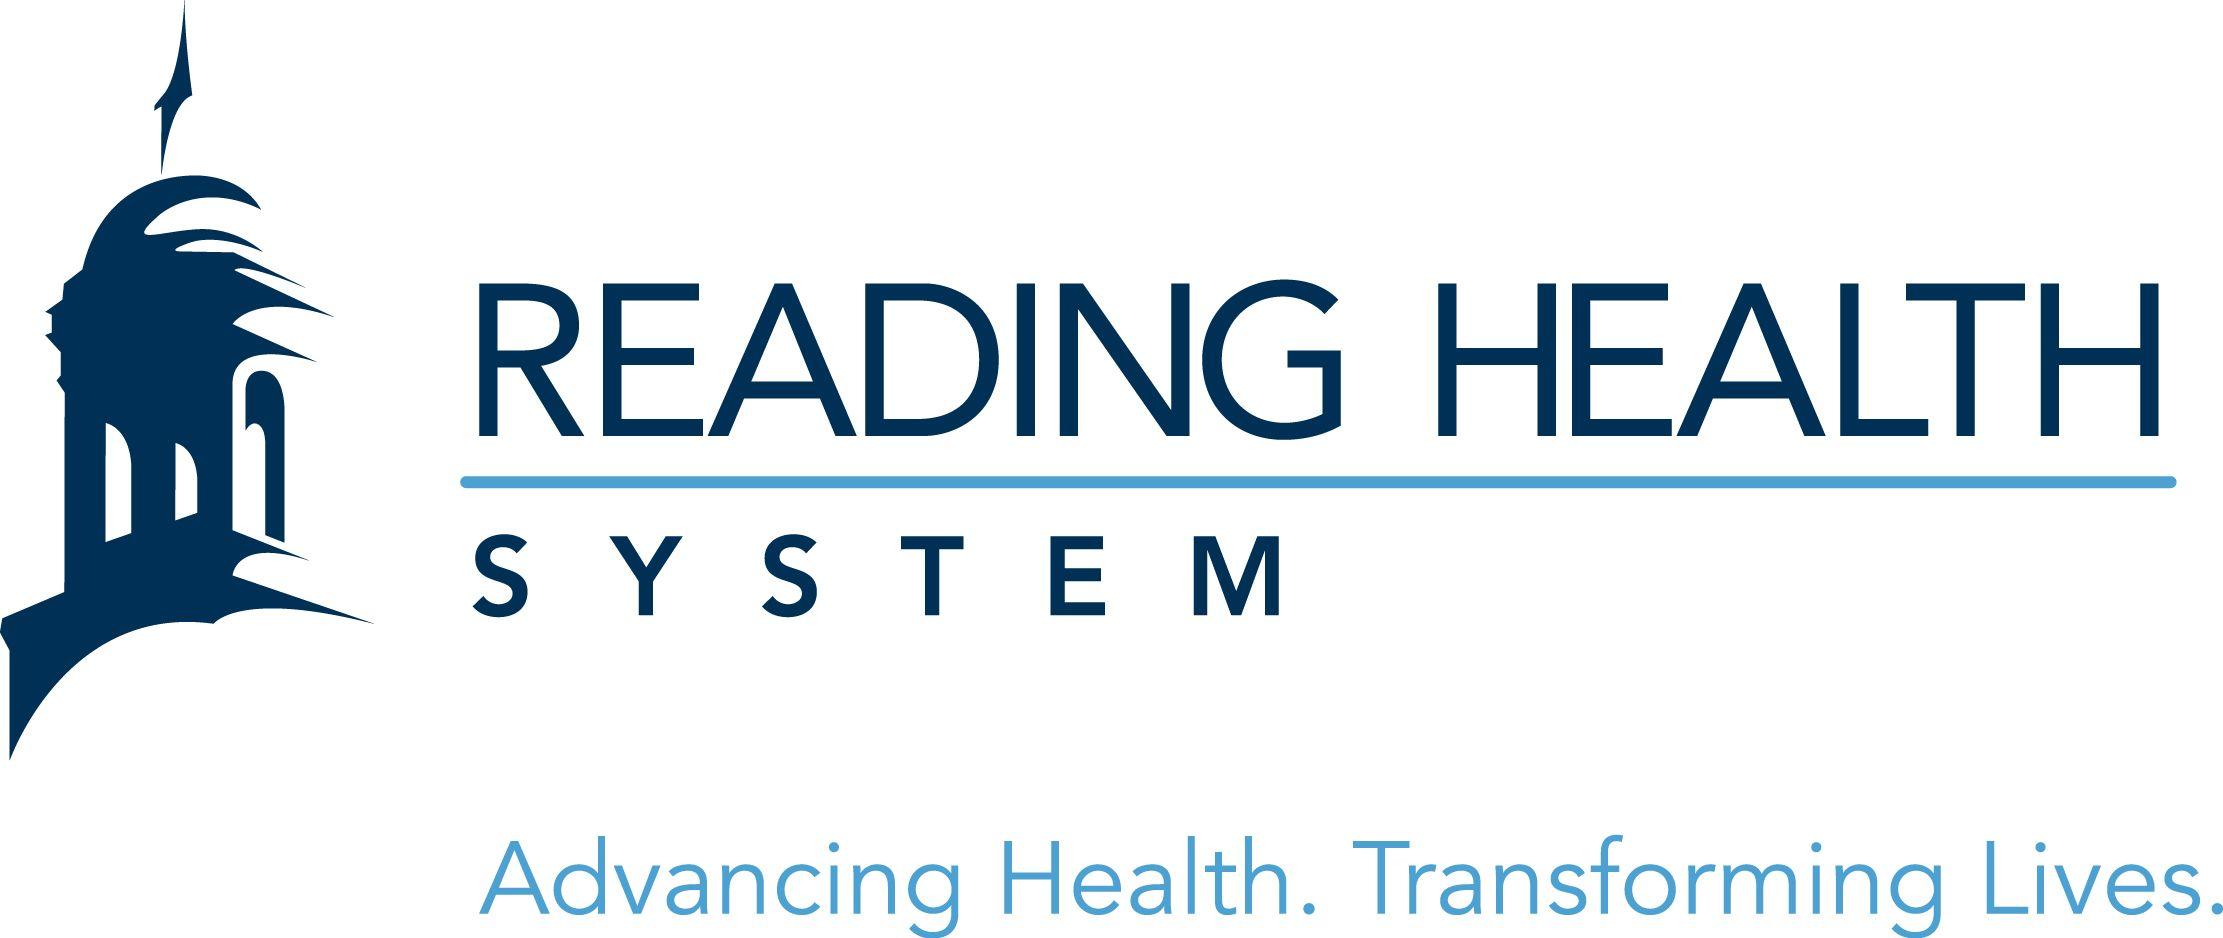 Reading Health System Logo - Creating new healthcare brand energy: Reading Health System - Trajectory